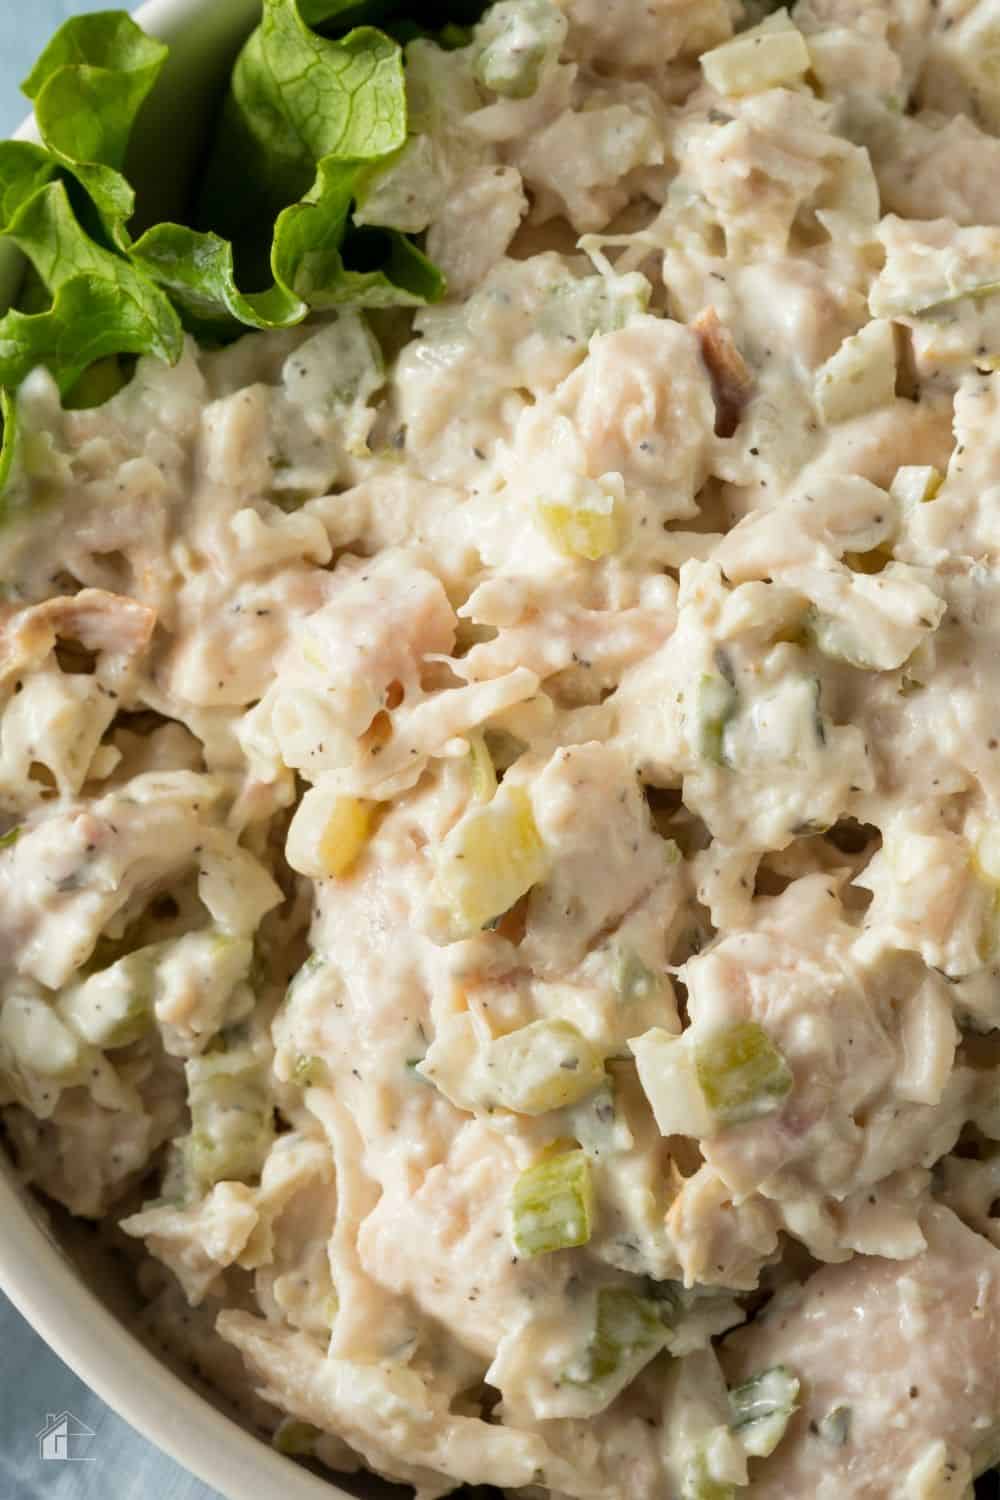 This easy chicken salad recipe is made with cooked chicken, celery, hard-boiled egg, relish, mayo, and Greek seasoning. #chickensalad #easychickensalad #salad #chickenrecipe via @mystayathome